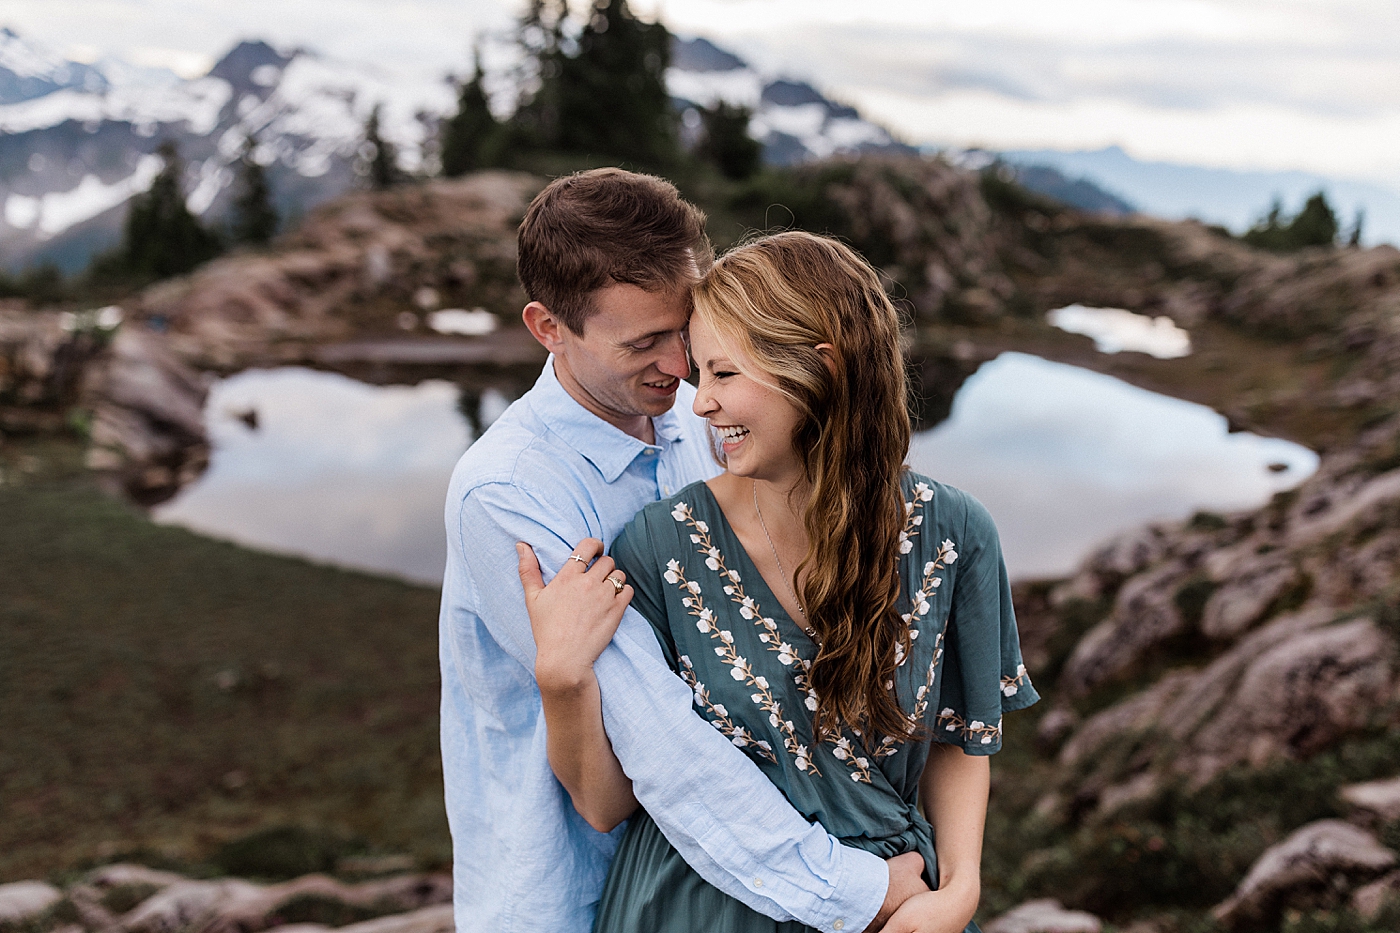 Engagement session after proposal during sunrise at Artists Point | Megan Montalvo Photography